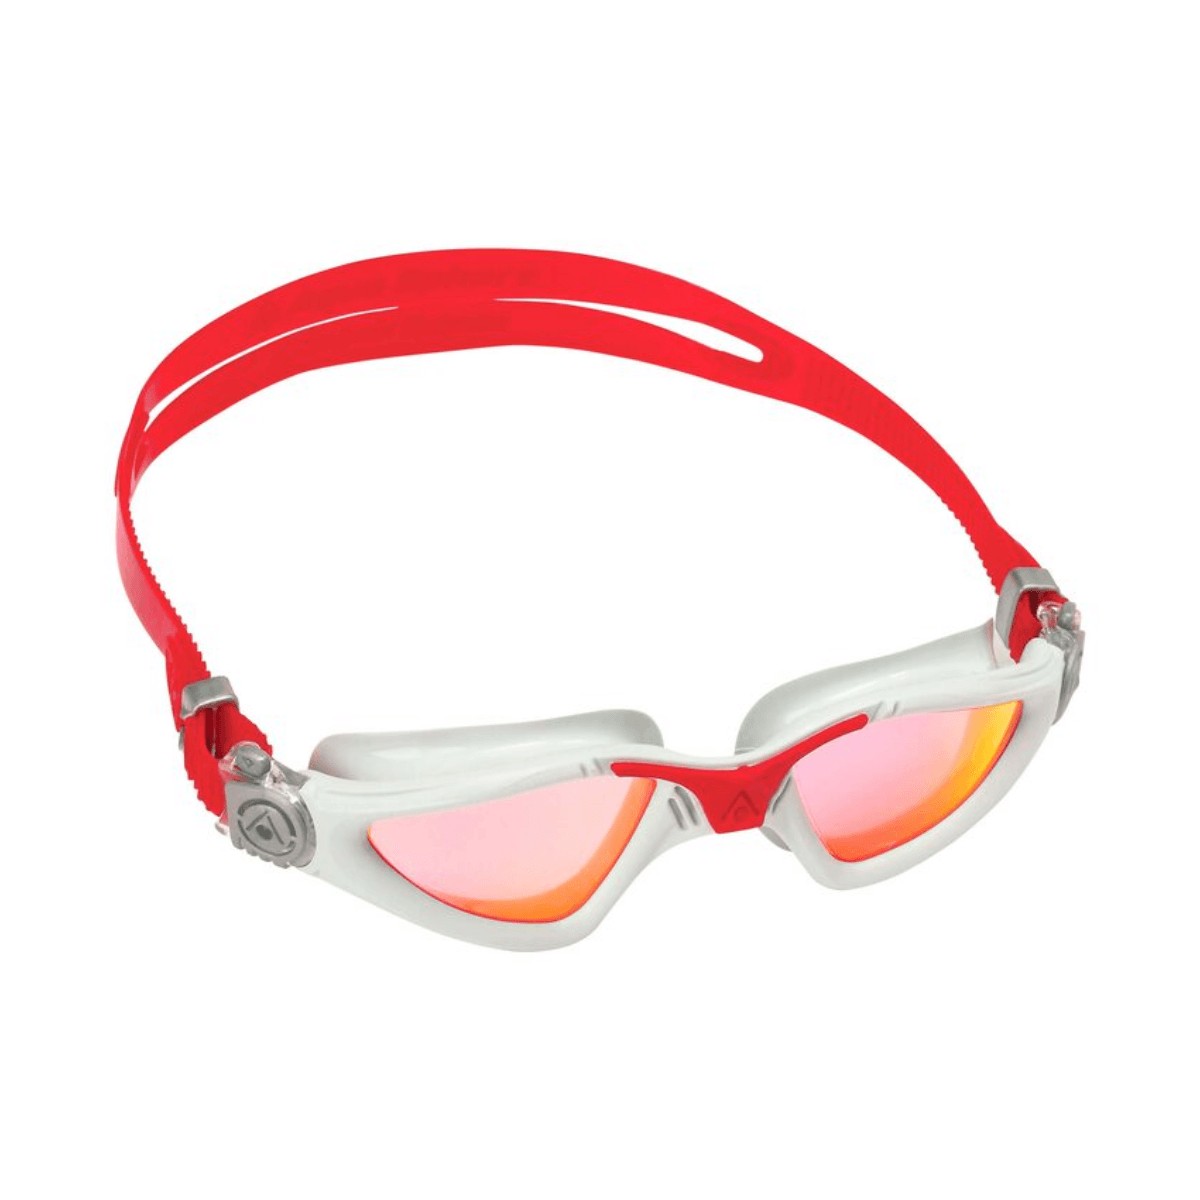 Aquasphere Kayenne Goggle Rot Graue Schwimmbrille